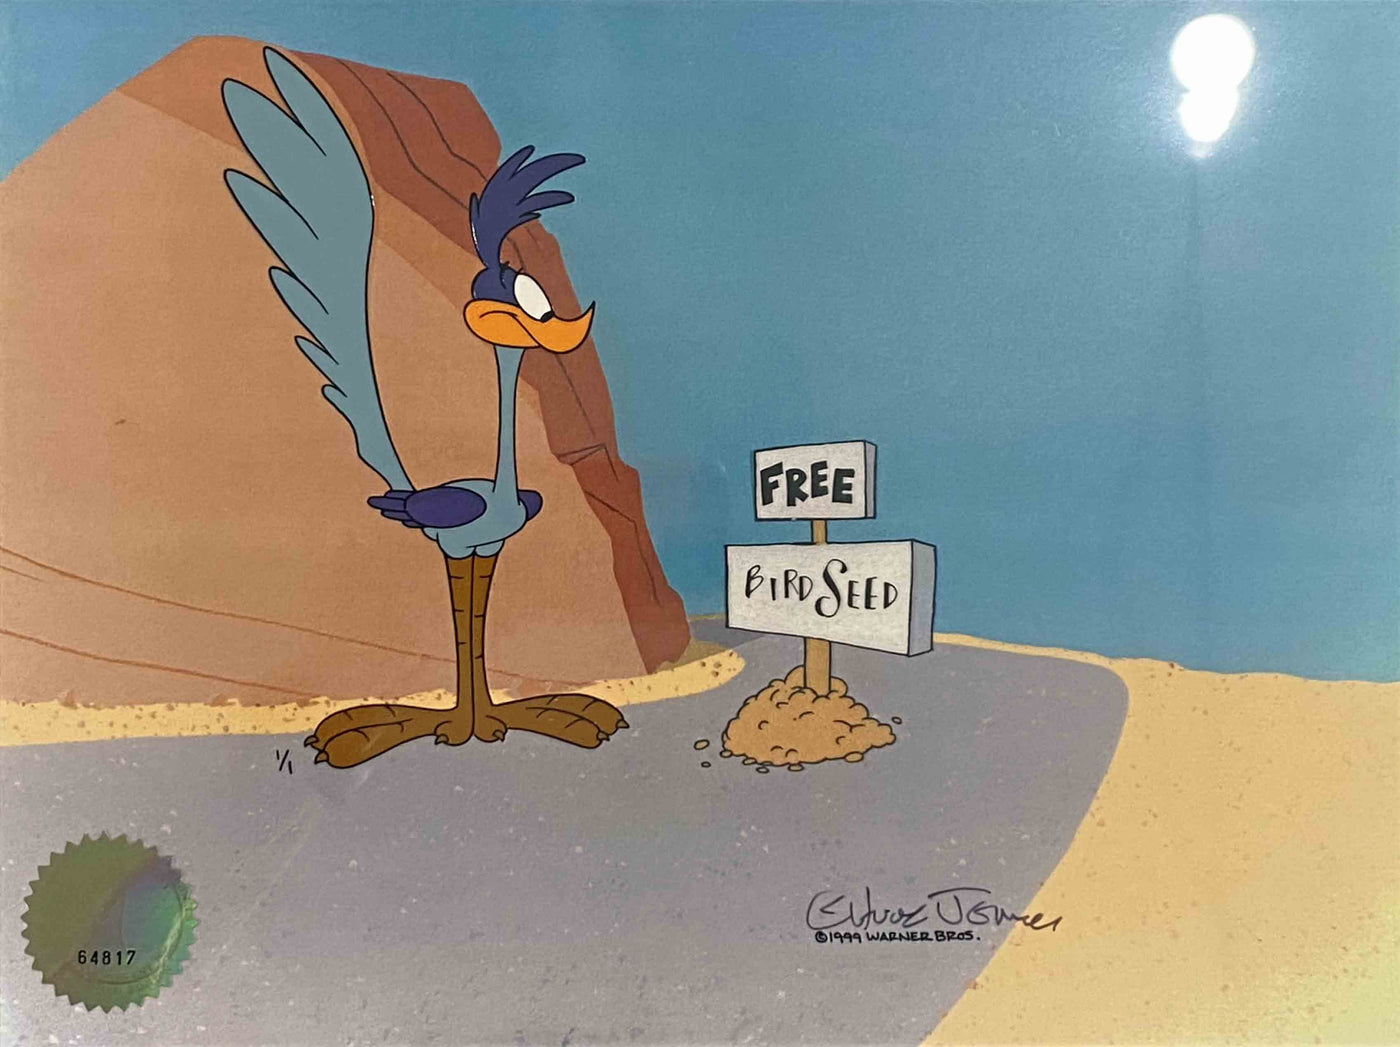 Original Warner Brothers Production Drawing and Matching 1/1 Cel from "Chariots of Fur" Featuring Road Runner Signed by Chuck Jones